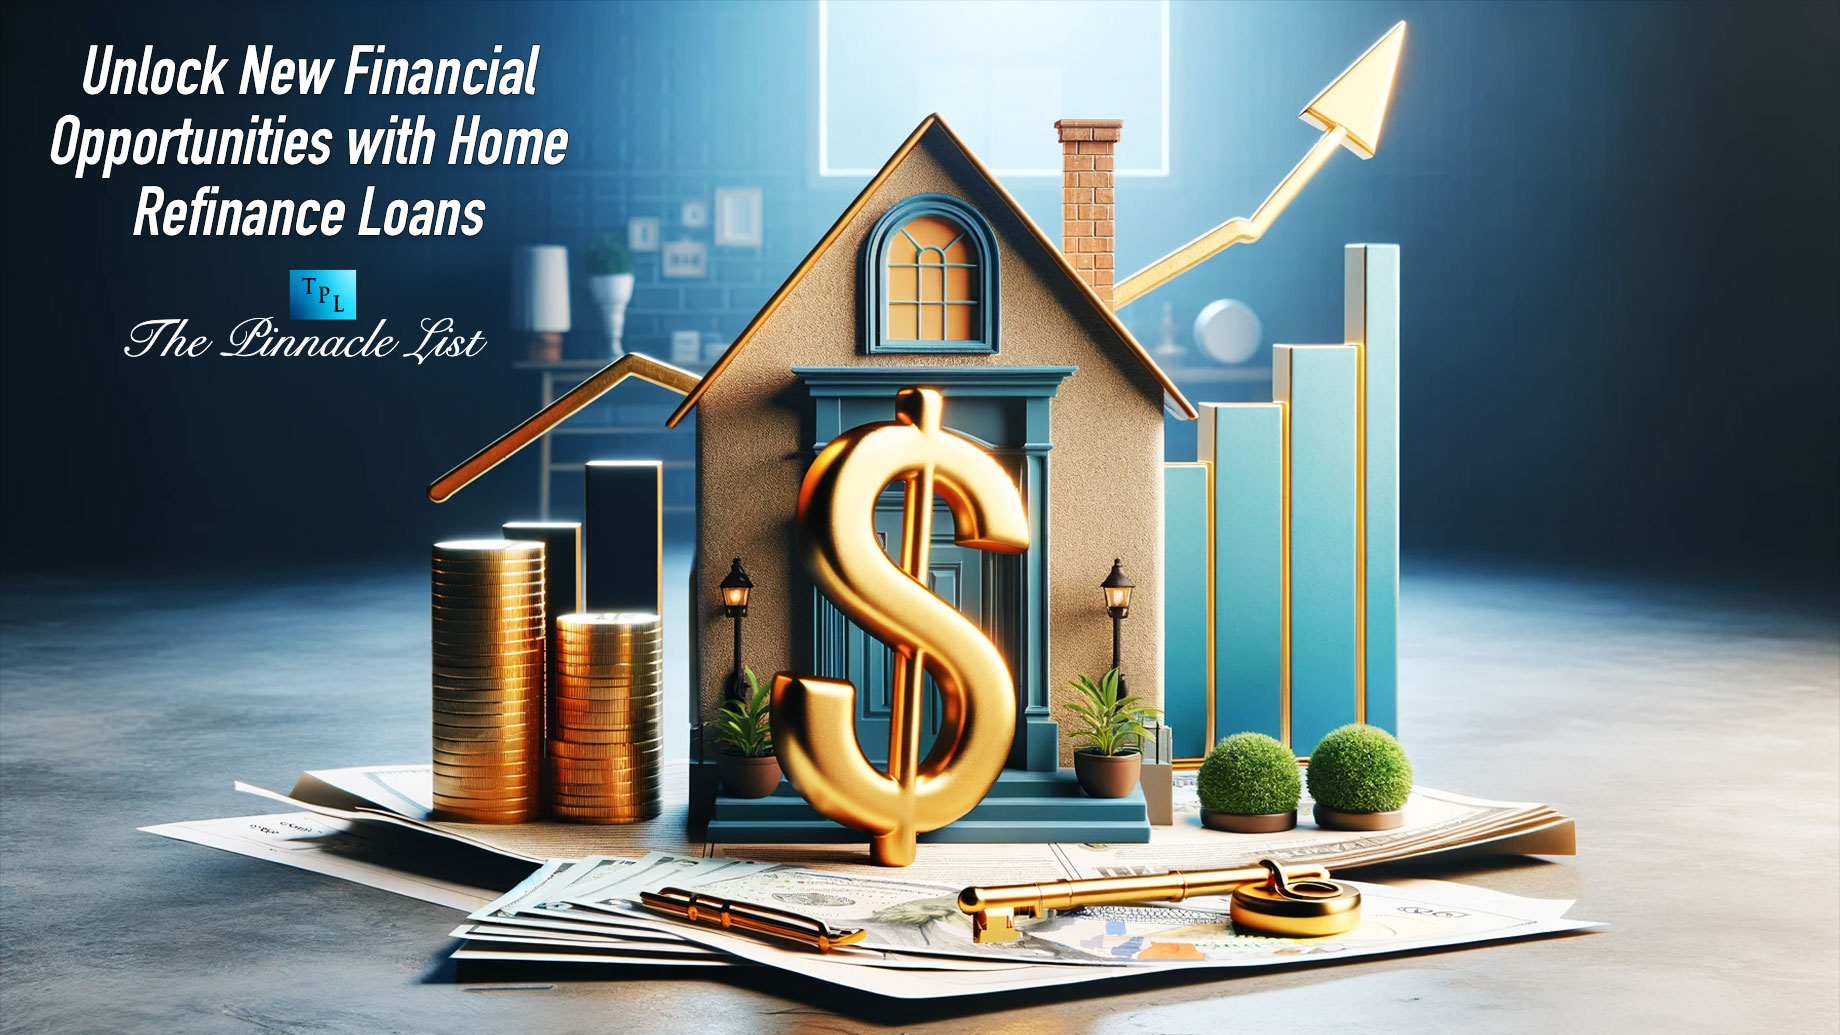 Unlock New Financial Opportunities with Home Refinance Loans